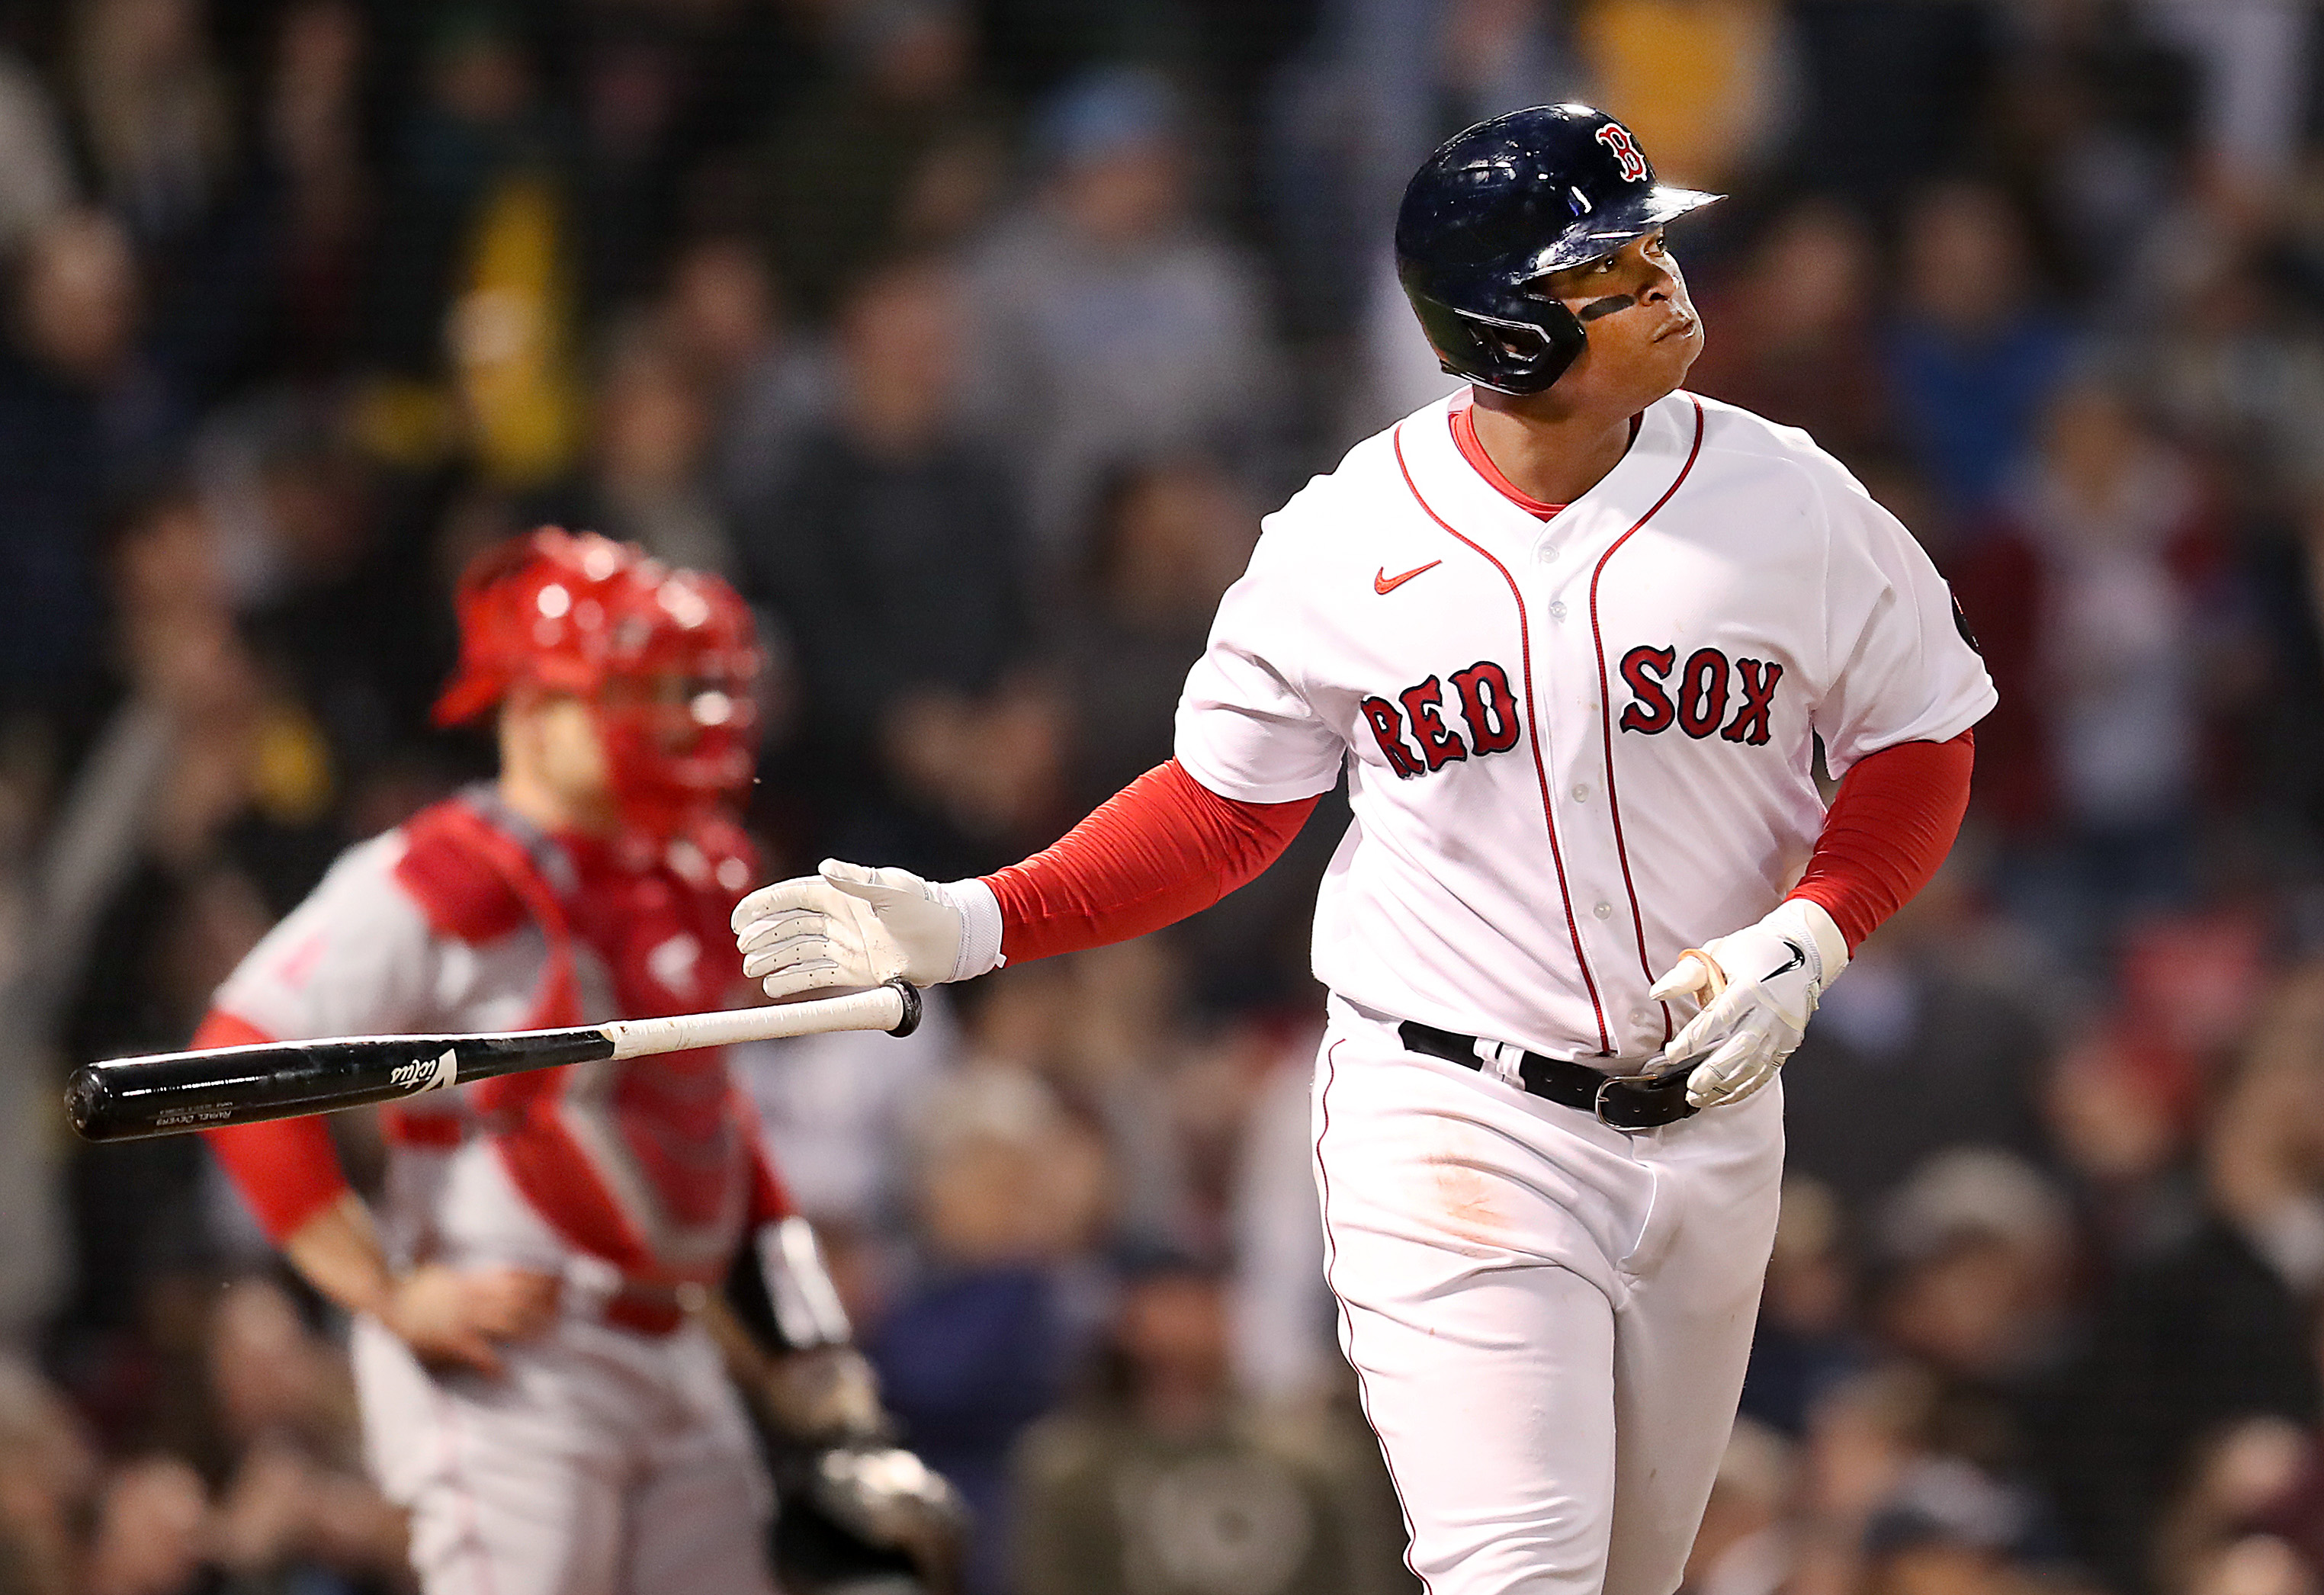 Yoán Moncada was a star prospect, but the Red Sox held on to Rafael Devers  — and it's paying off - The Boston Globe